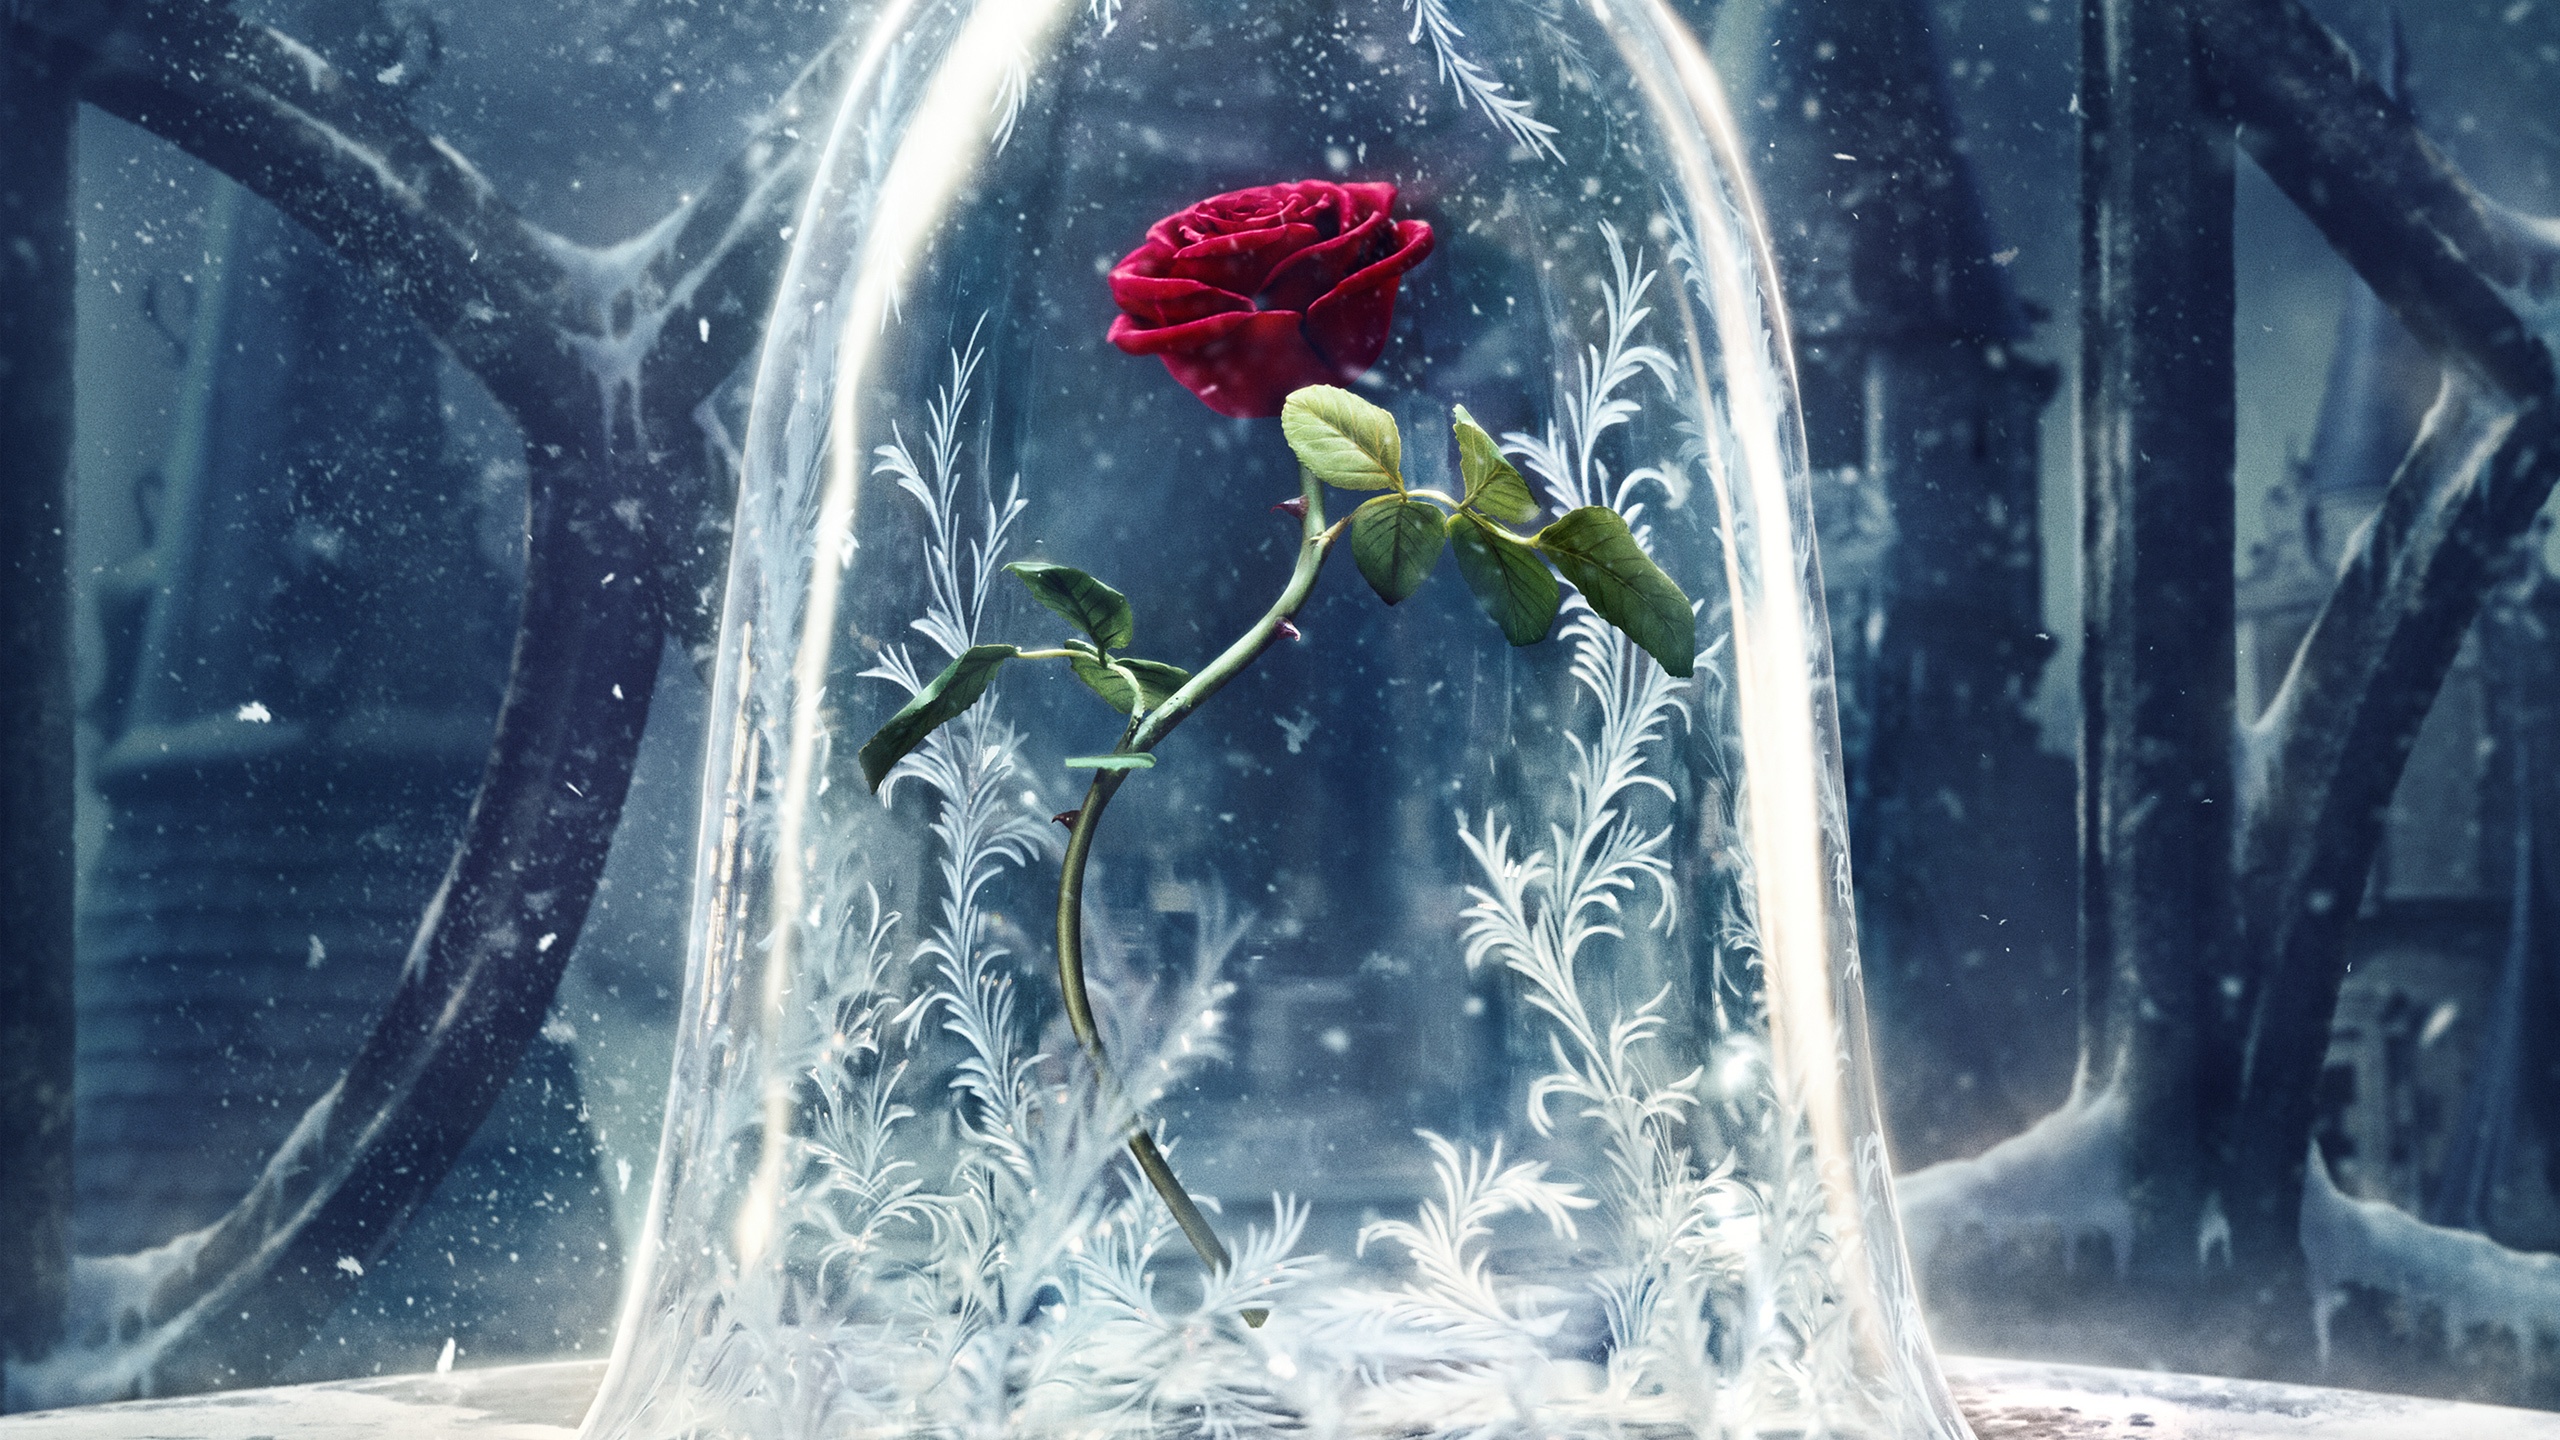 Beauty And The Beast Backgrounds - HD Wallpaper 